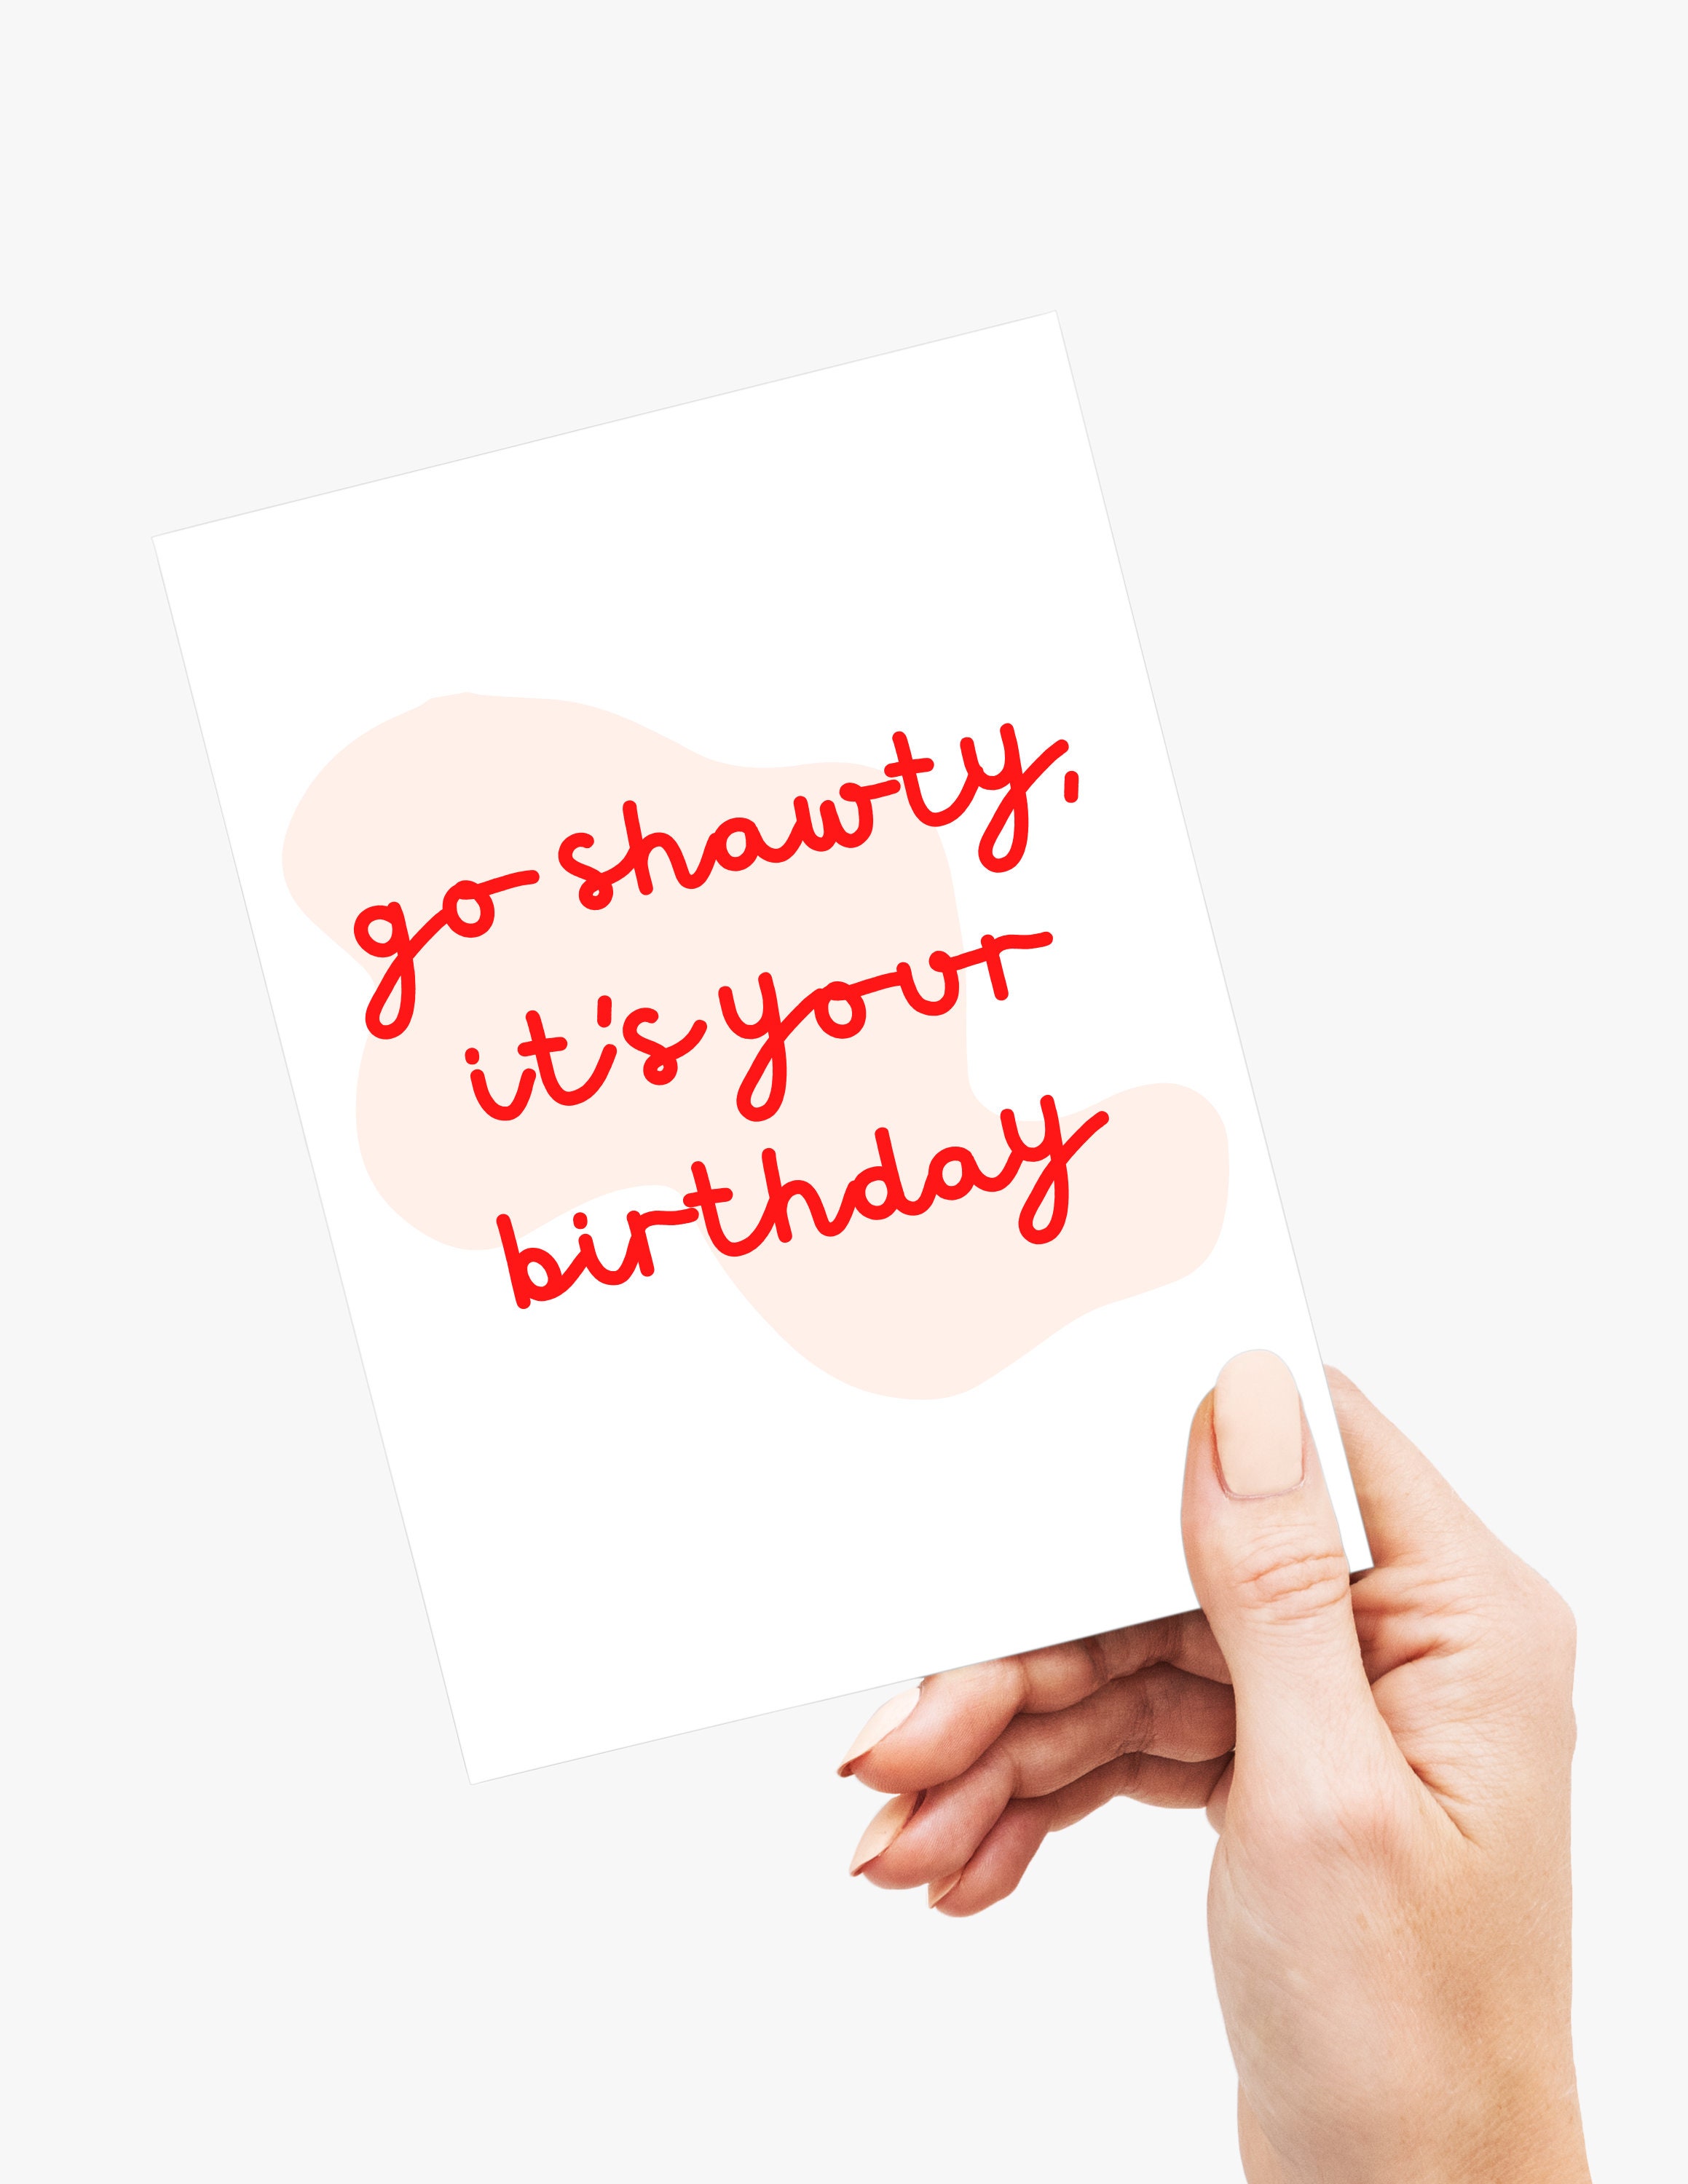 Go Shawty It's Your Birthday Banner, Hip Hop Birthday Party Decorations  Supplies, Rap Theme Bday Bunting Sign, Pre-strung, Photo Props (Rose Gold)